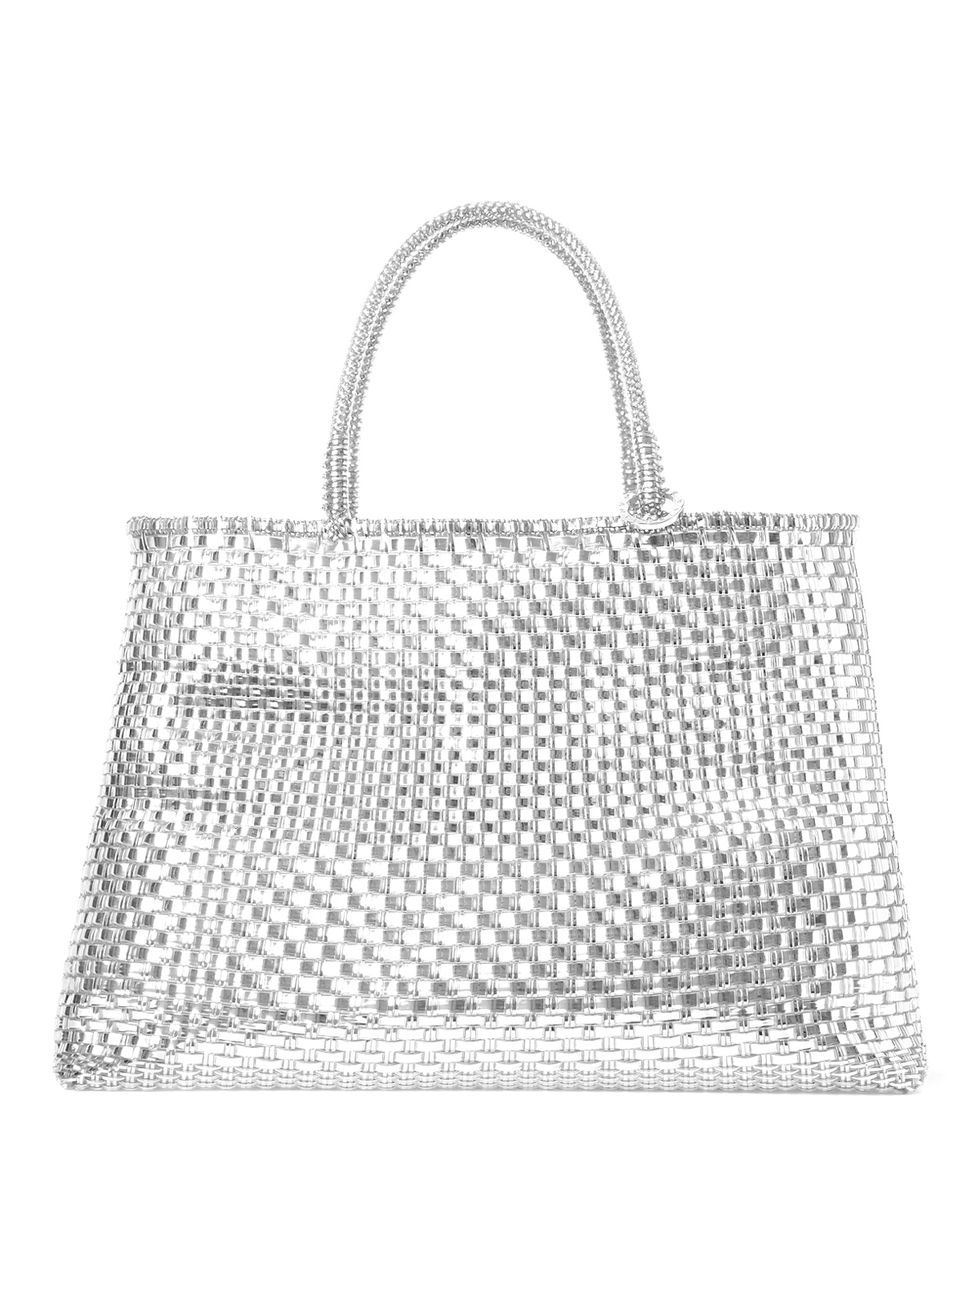 Bag, Style, Luggage and bags, Shoulder bag, Grey, Tote bag, Black-and-white, Monochrome, Home accessories, Handbag, 